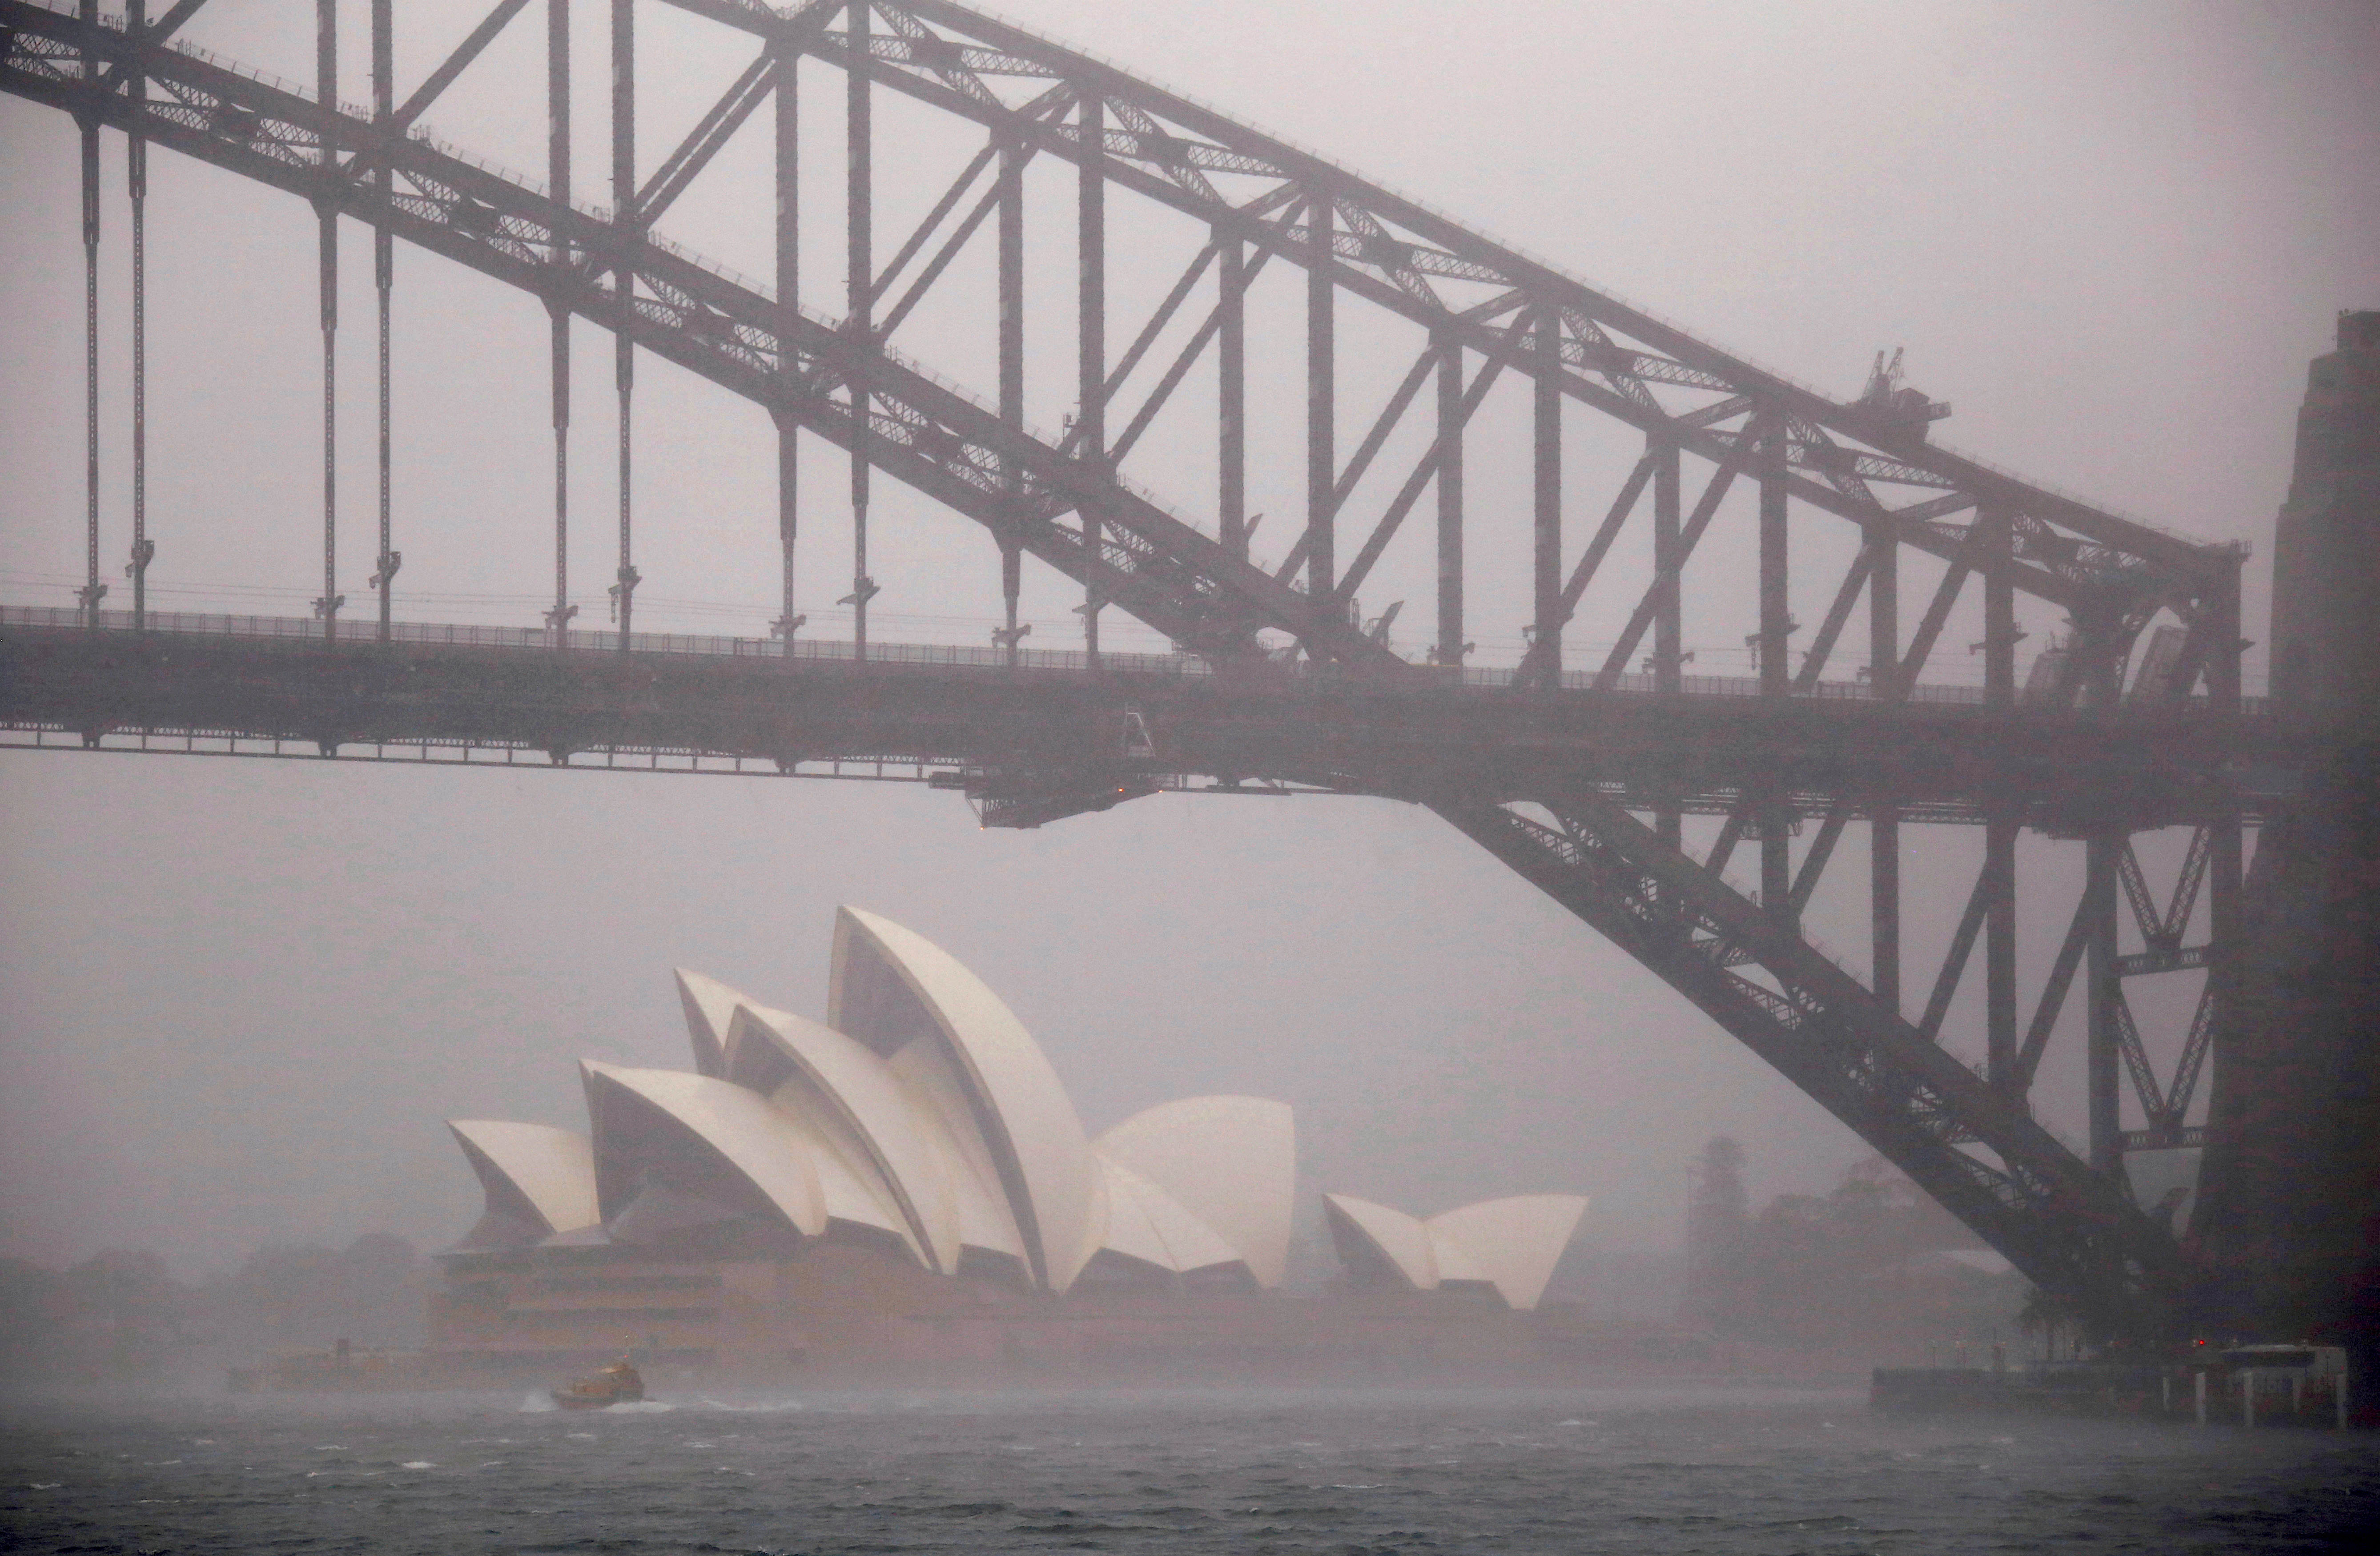 A boat passes under the Sydney Harbour Bridge and in front of the Sydney Opera House as strong winds and heavy rain hit the city of Sydney